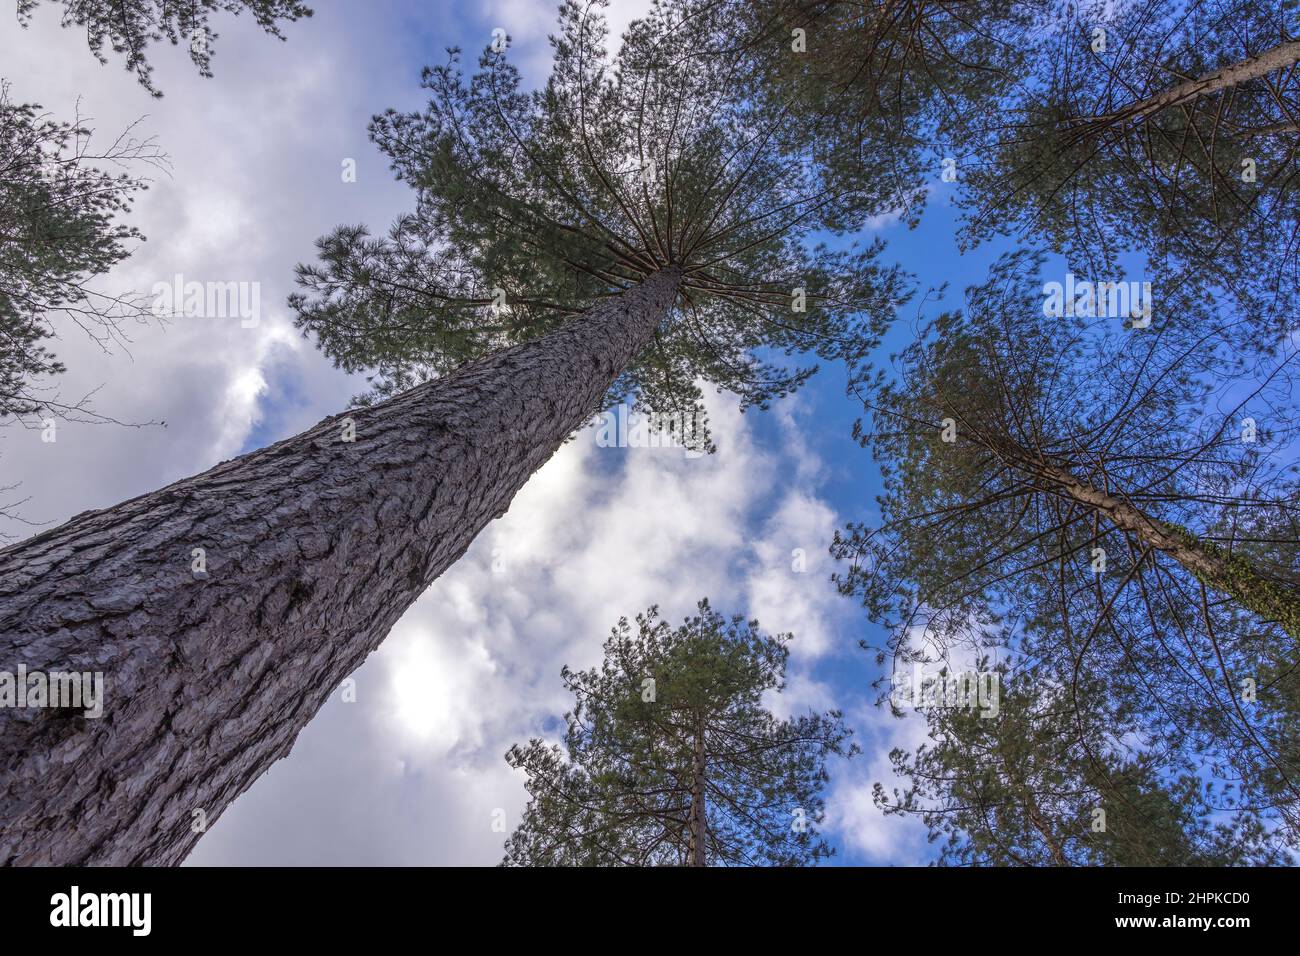 Tall pine trees reaching for the sunlight Stock Photo